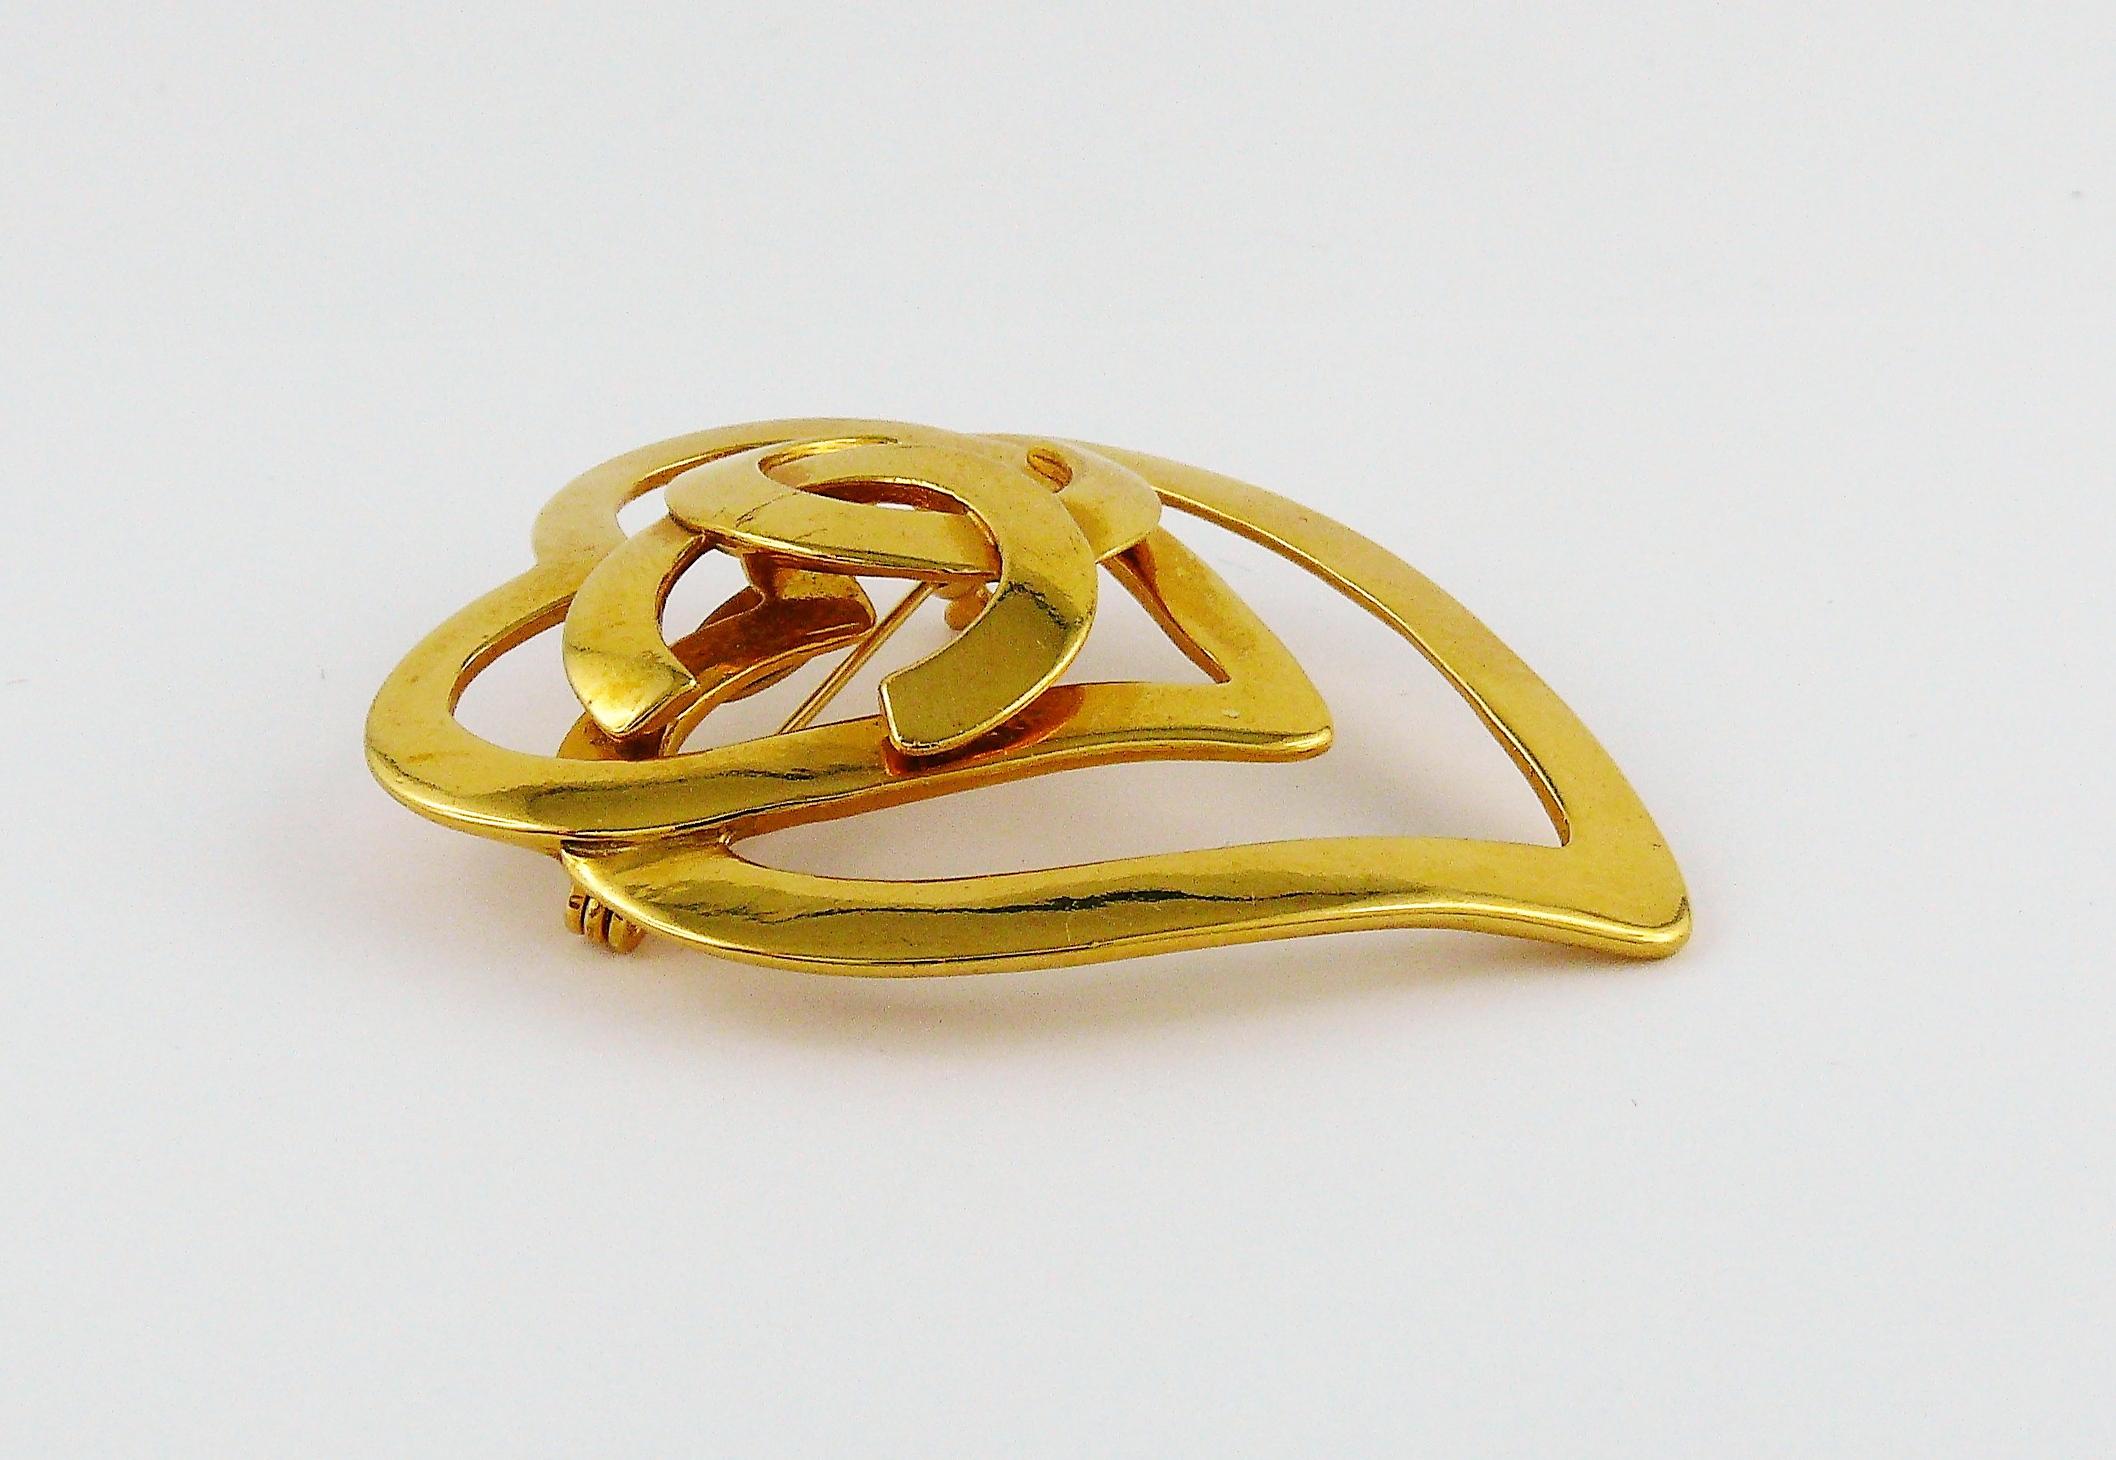 CHANEL vintage gold toned brooch featuring a double heart with a large CC logo.

Spring/Summer 1995 Collection.

Embossed CHANEL 95 P Made in France.

Indicative measurements : max. height approx. 5.5 cm (2.17 inches) / max. width approx. 4.6 cm